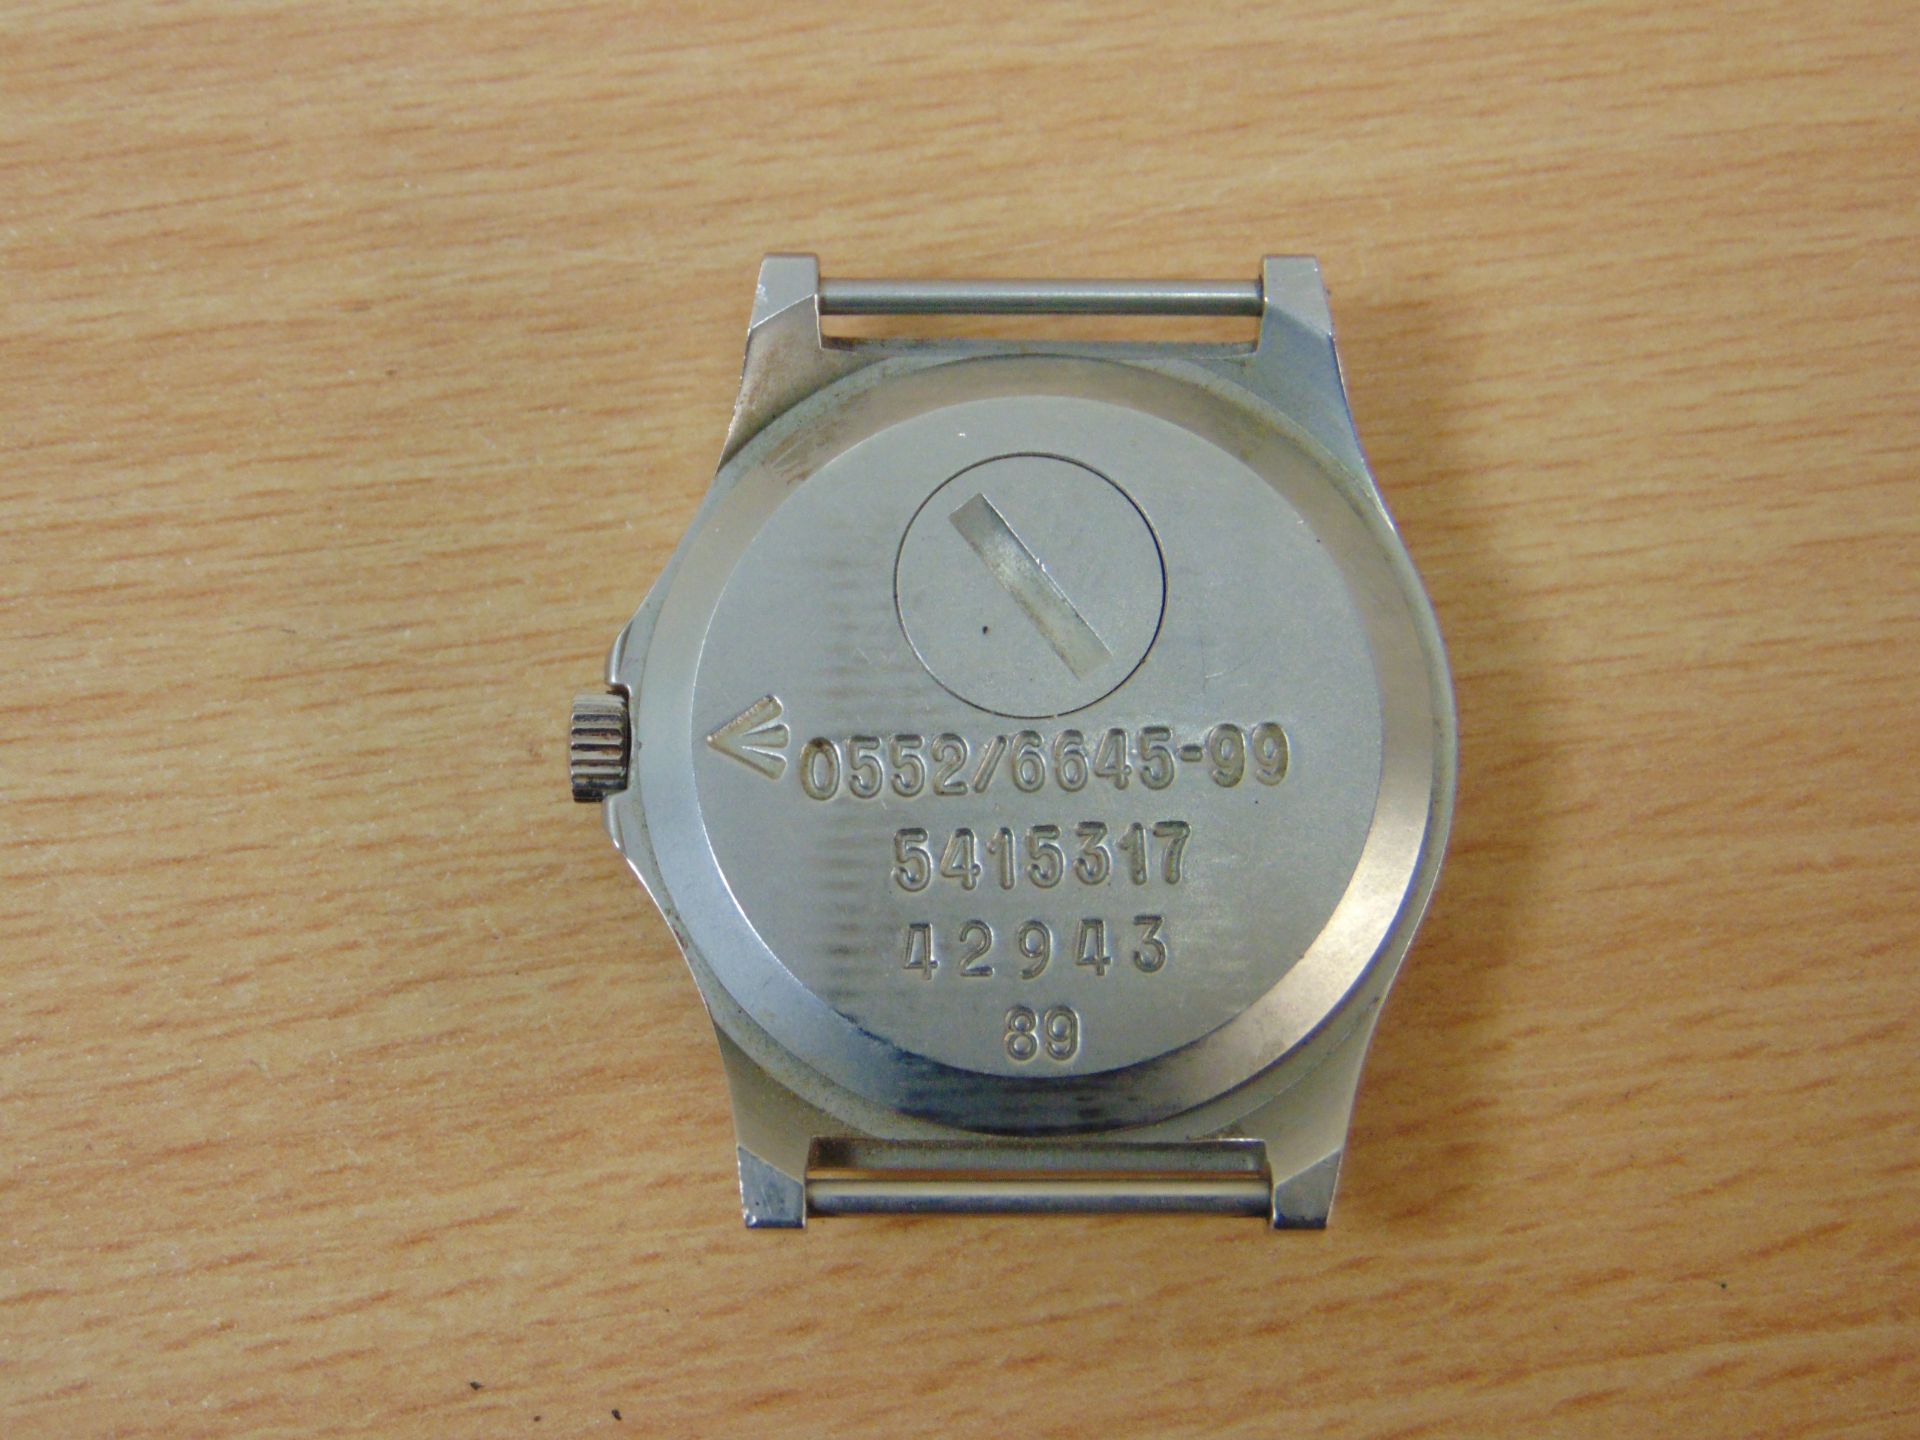 VERY RARE 0552 CWC ROYAL MARINES ISSUE SERVICE WATCH DATE 1989 (GULF WAR) - Image 7 of 9